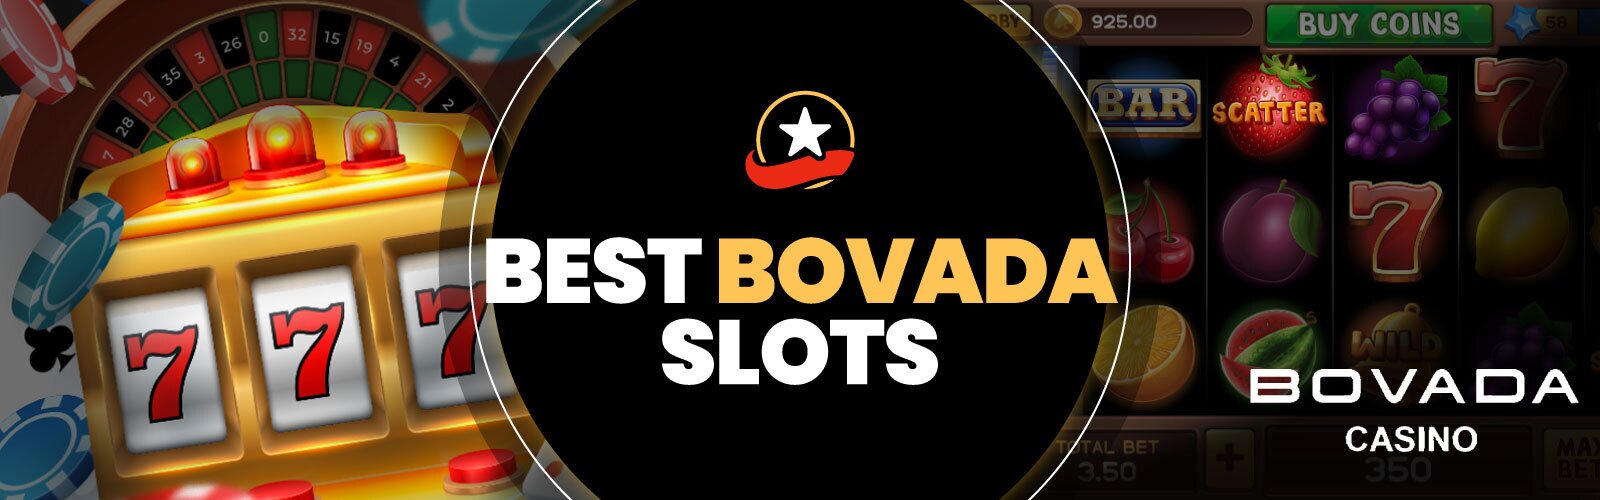 Best Slots Games To Play At Bovada Casino In